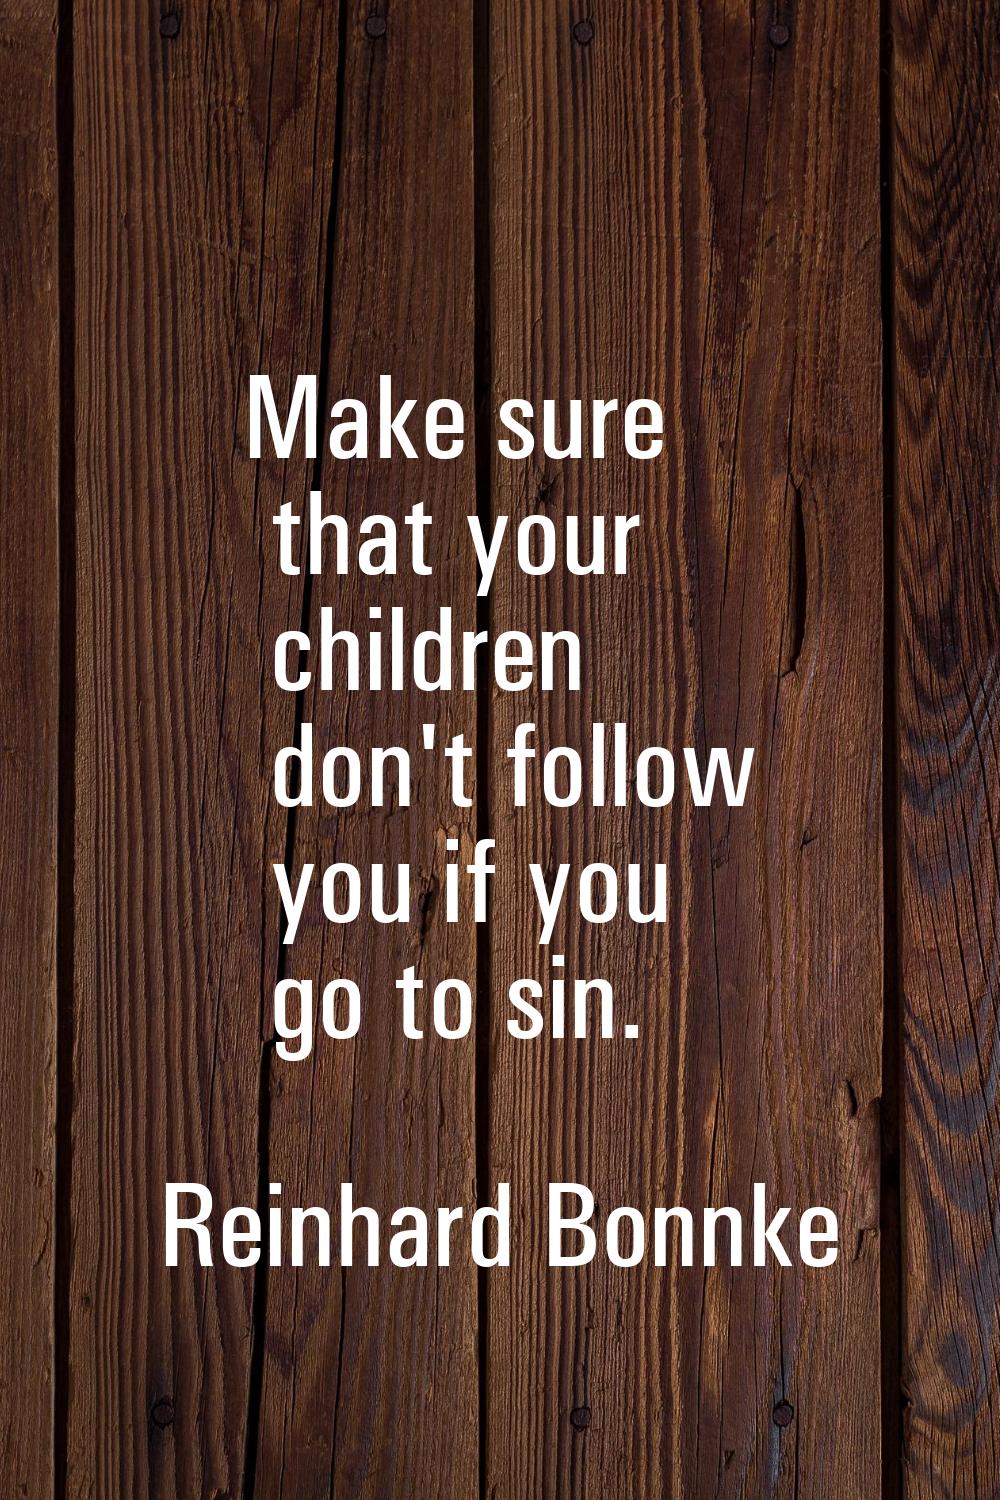 Make sure that your children don't follow you if you go to sin.